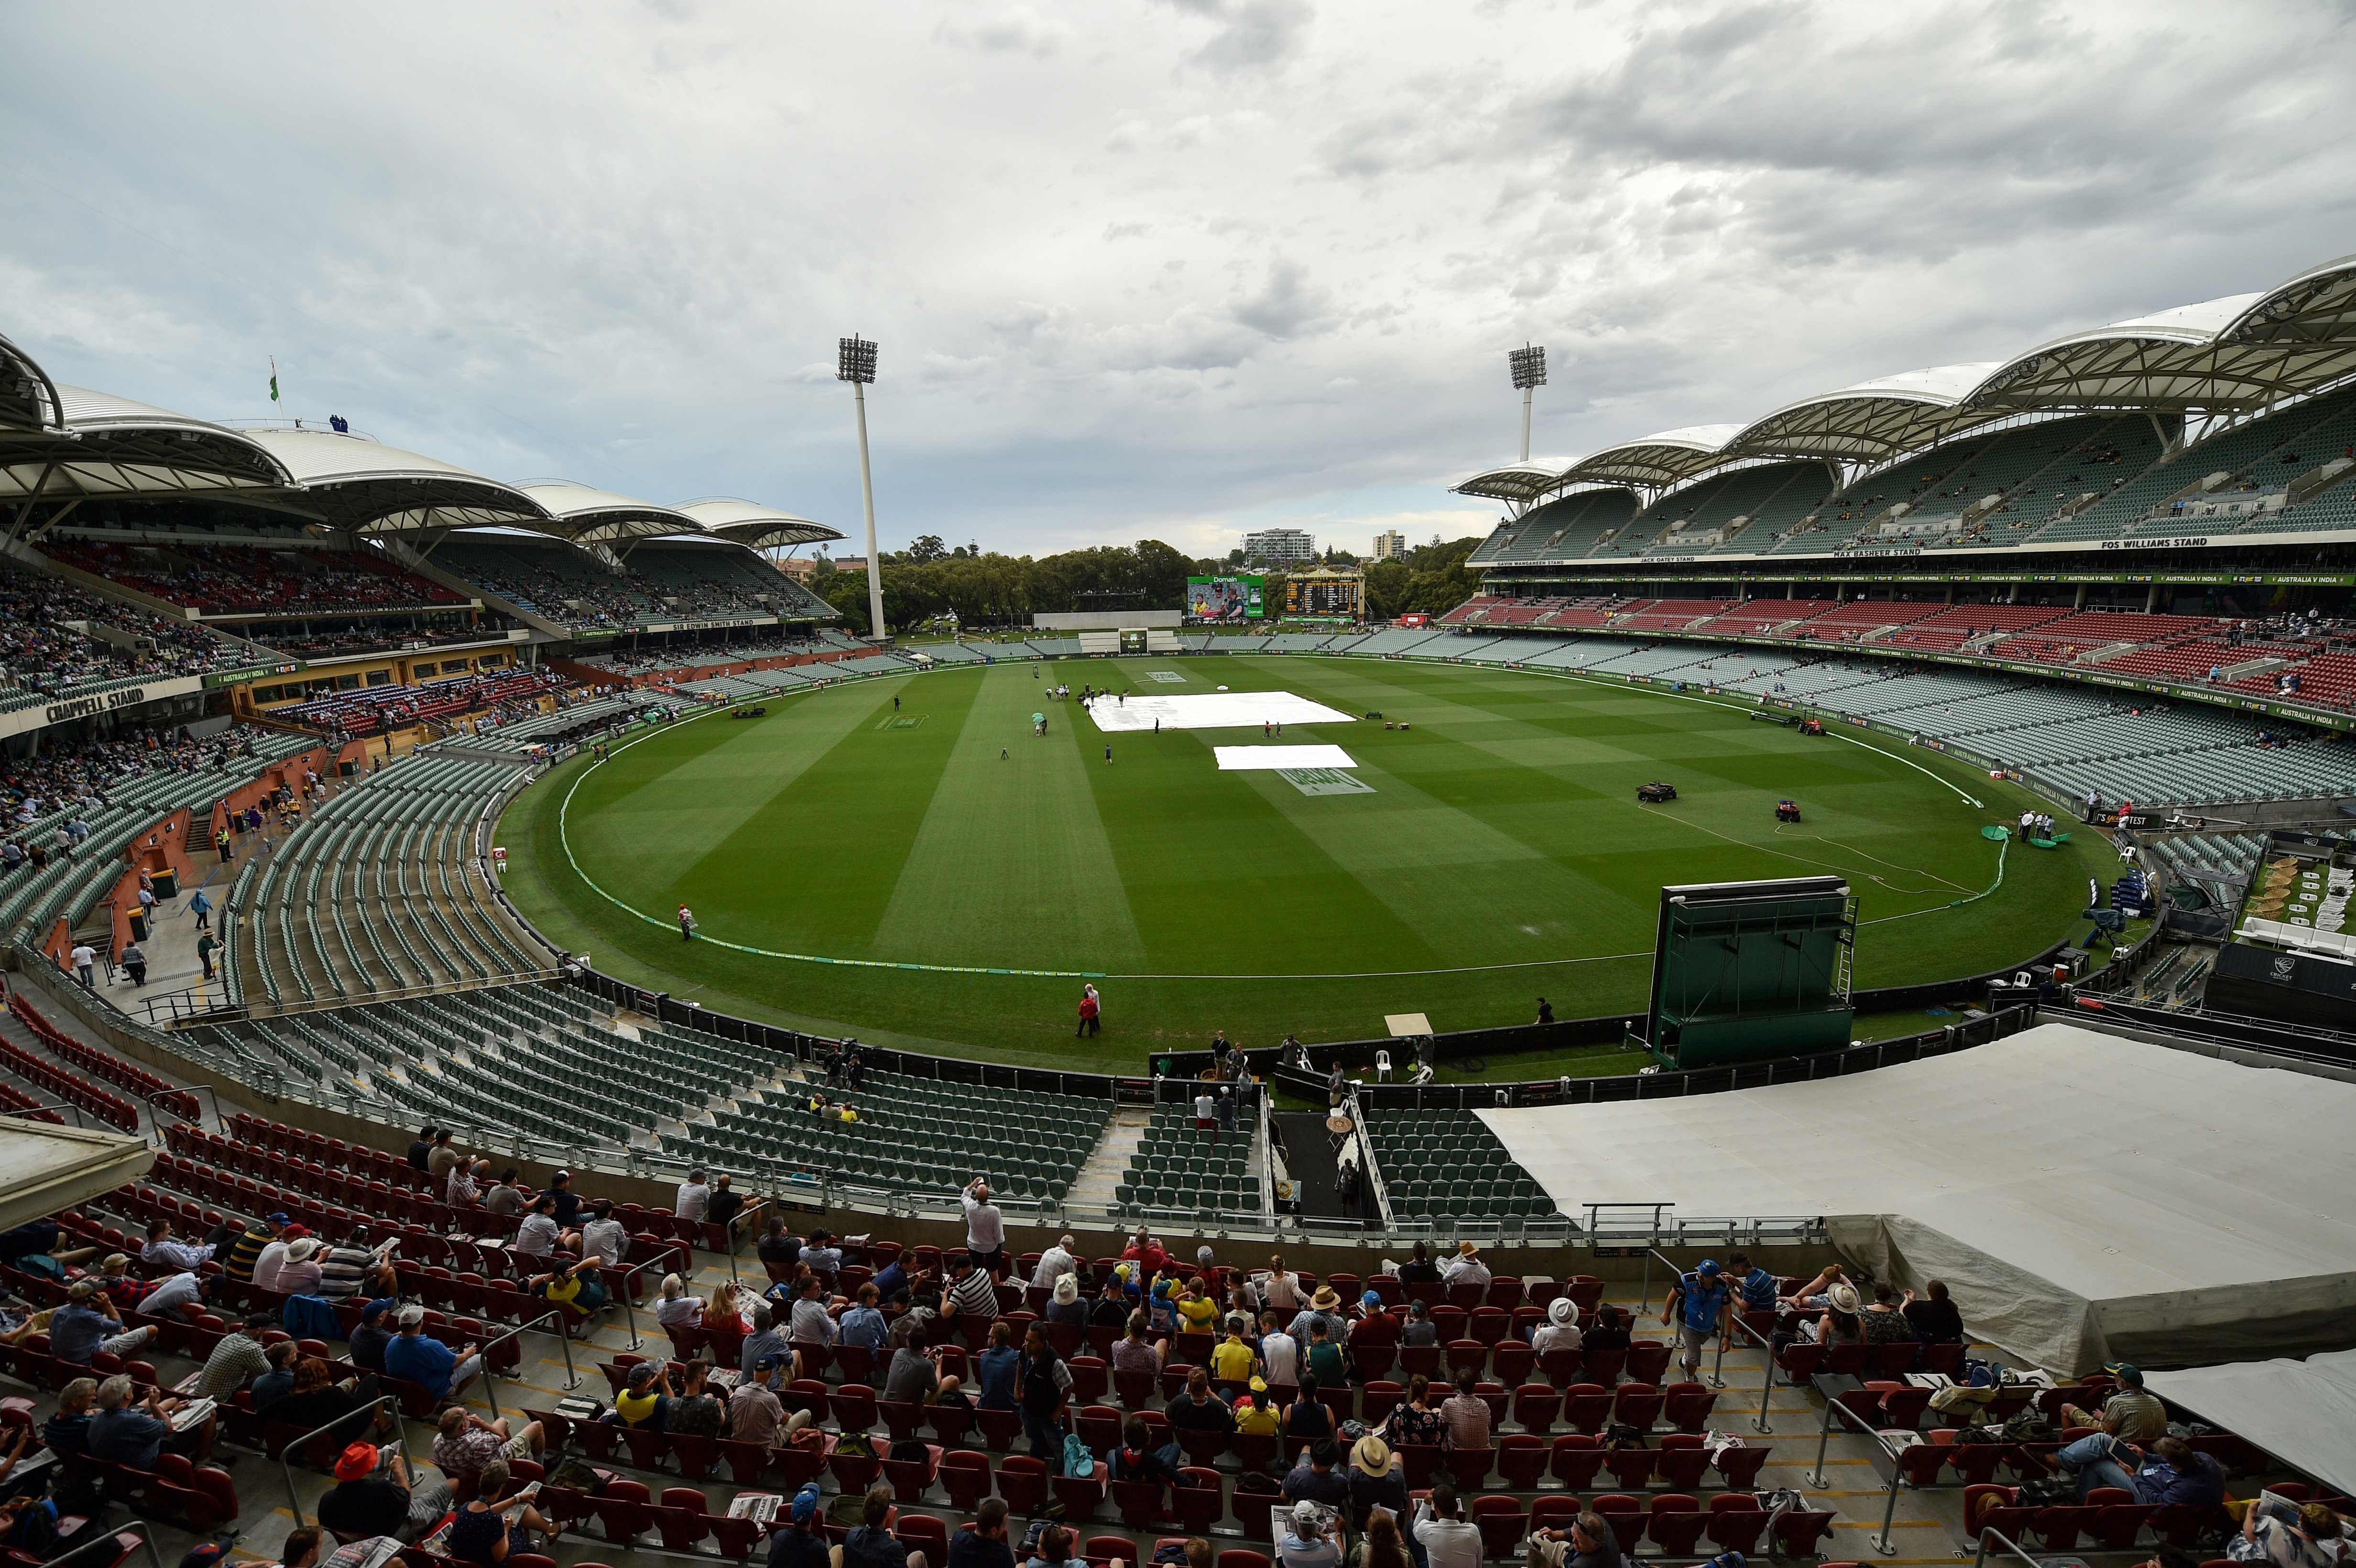 Groundsmen remove rain covers on the wicket at the start of day three of the first Test cricket match between Australia and India at the Adelaide Oval. Credit: AFP File Photo